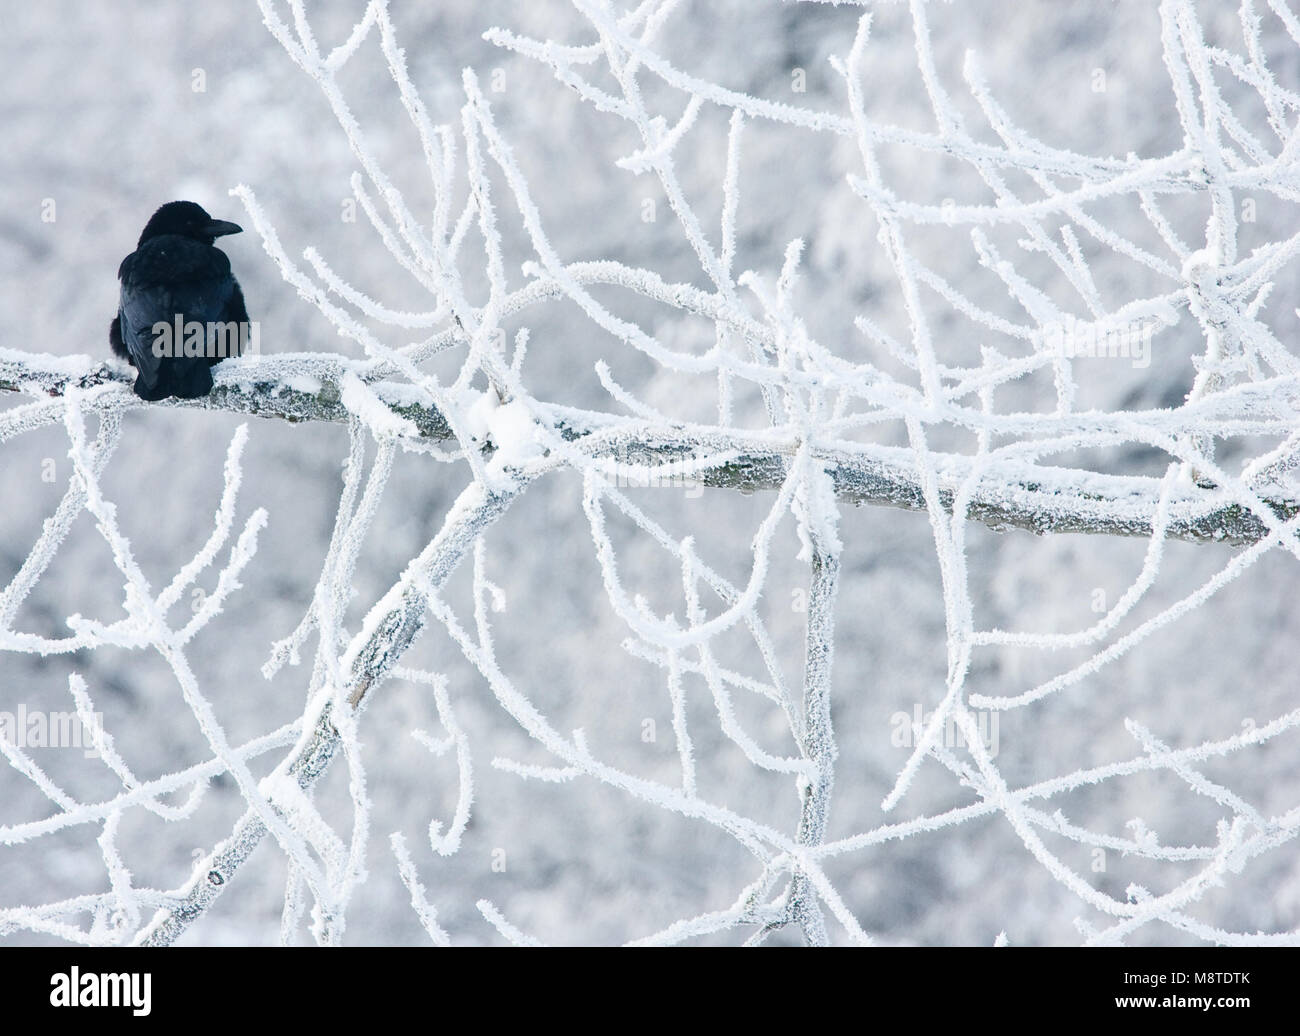 Zwarte Kraai zittend in besneeuwde boom;  Carrion Crow perched in tree with snow Stock Photo